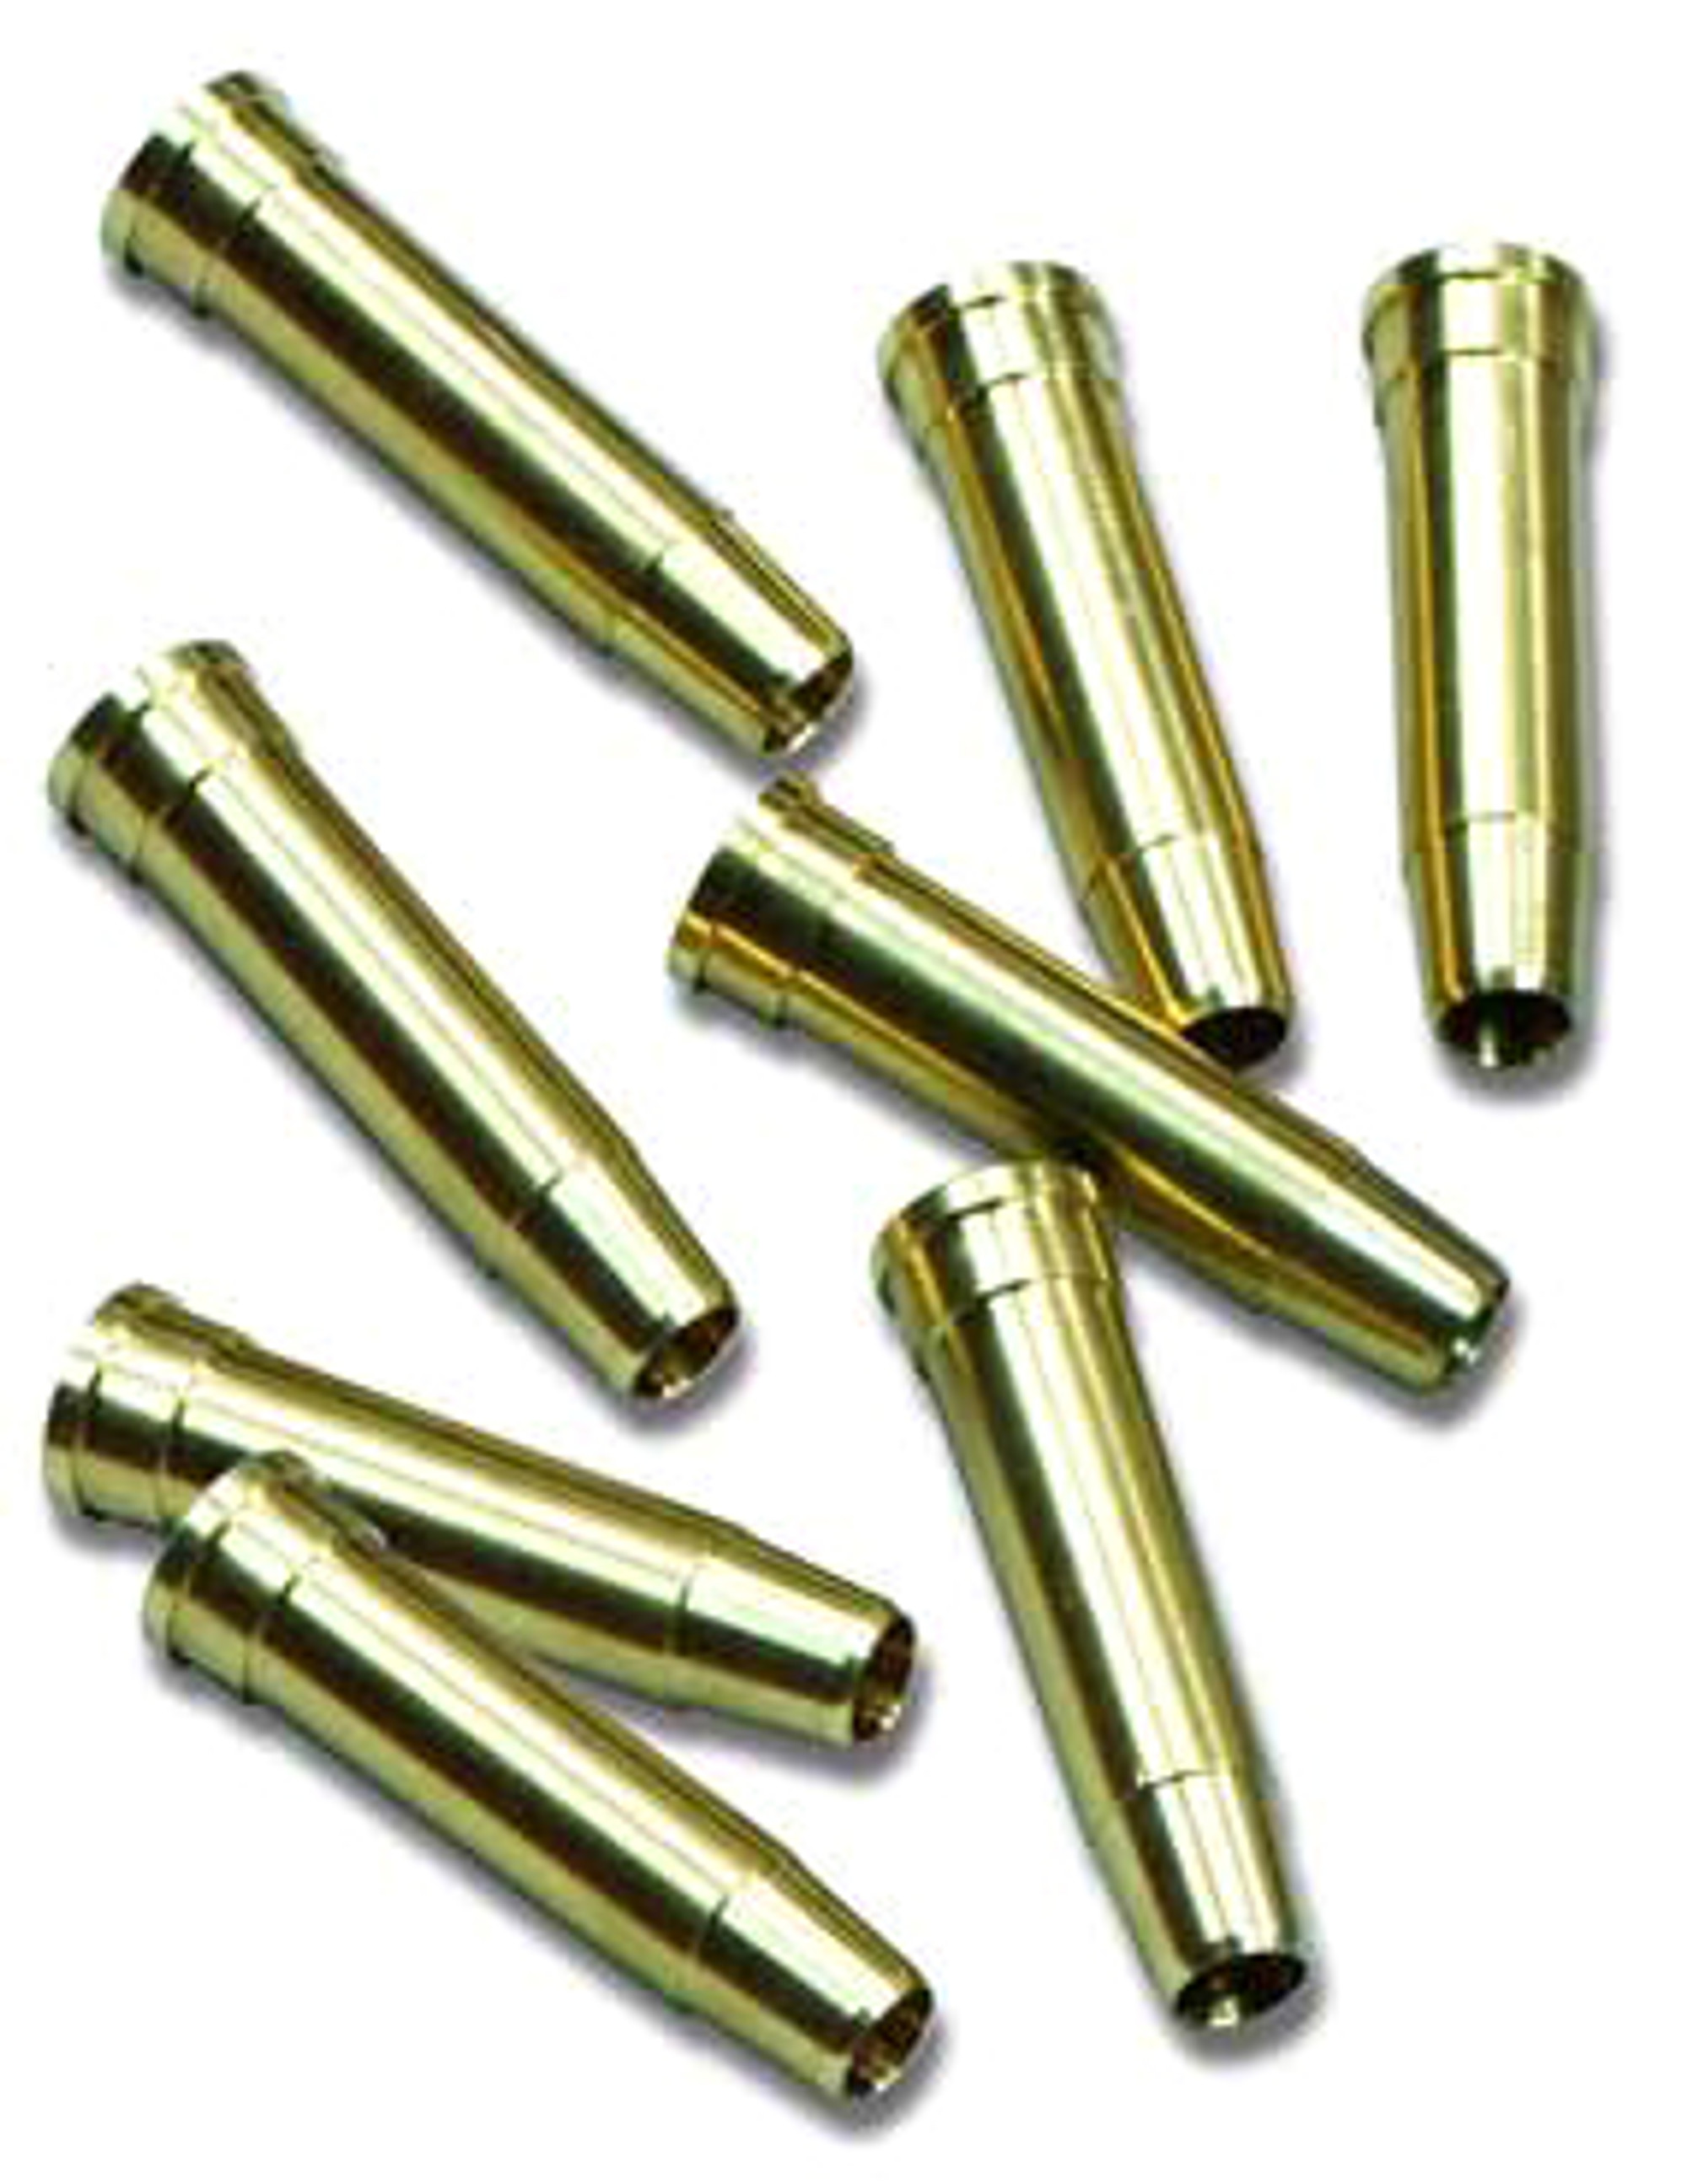 Spare Brass Shells for Airsoft UHC Gas Revolver Series (131 132 133 series)